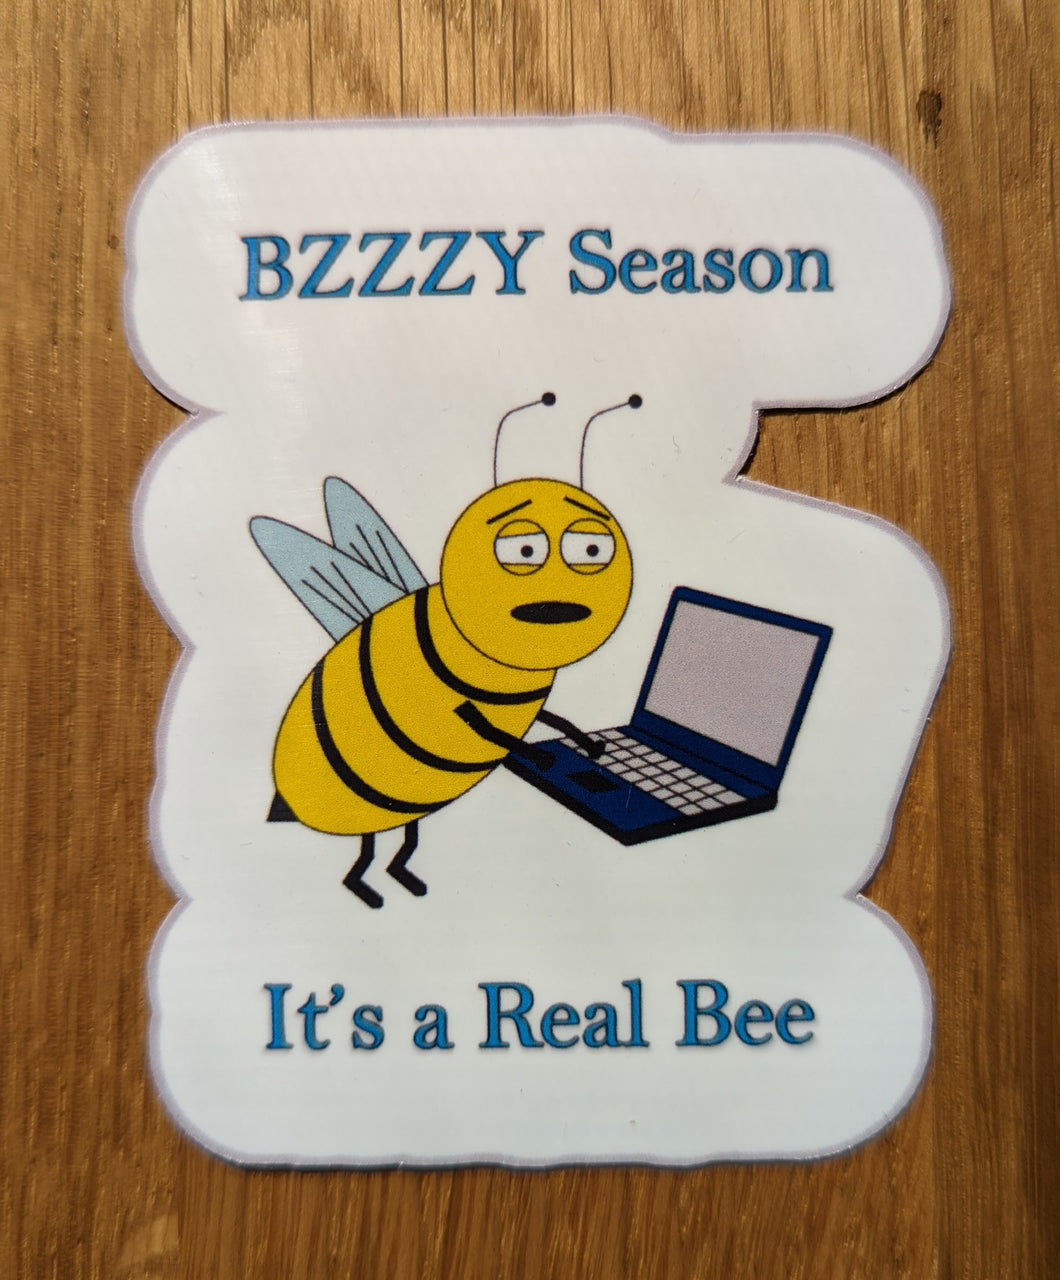 Sticker - Bzzzy Season is a Real Bee